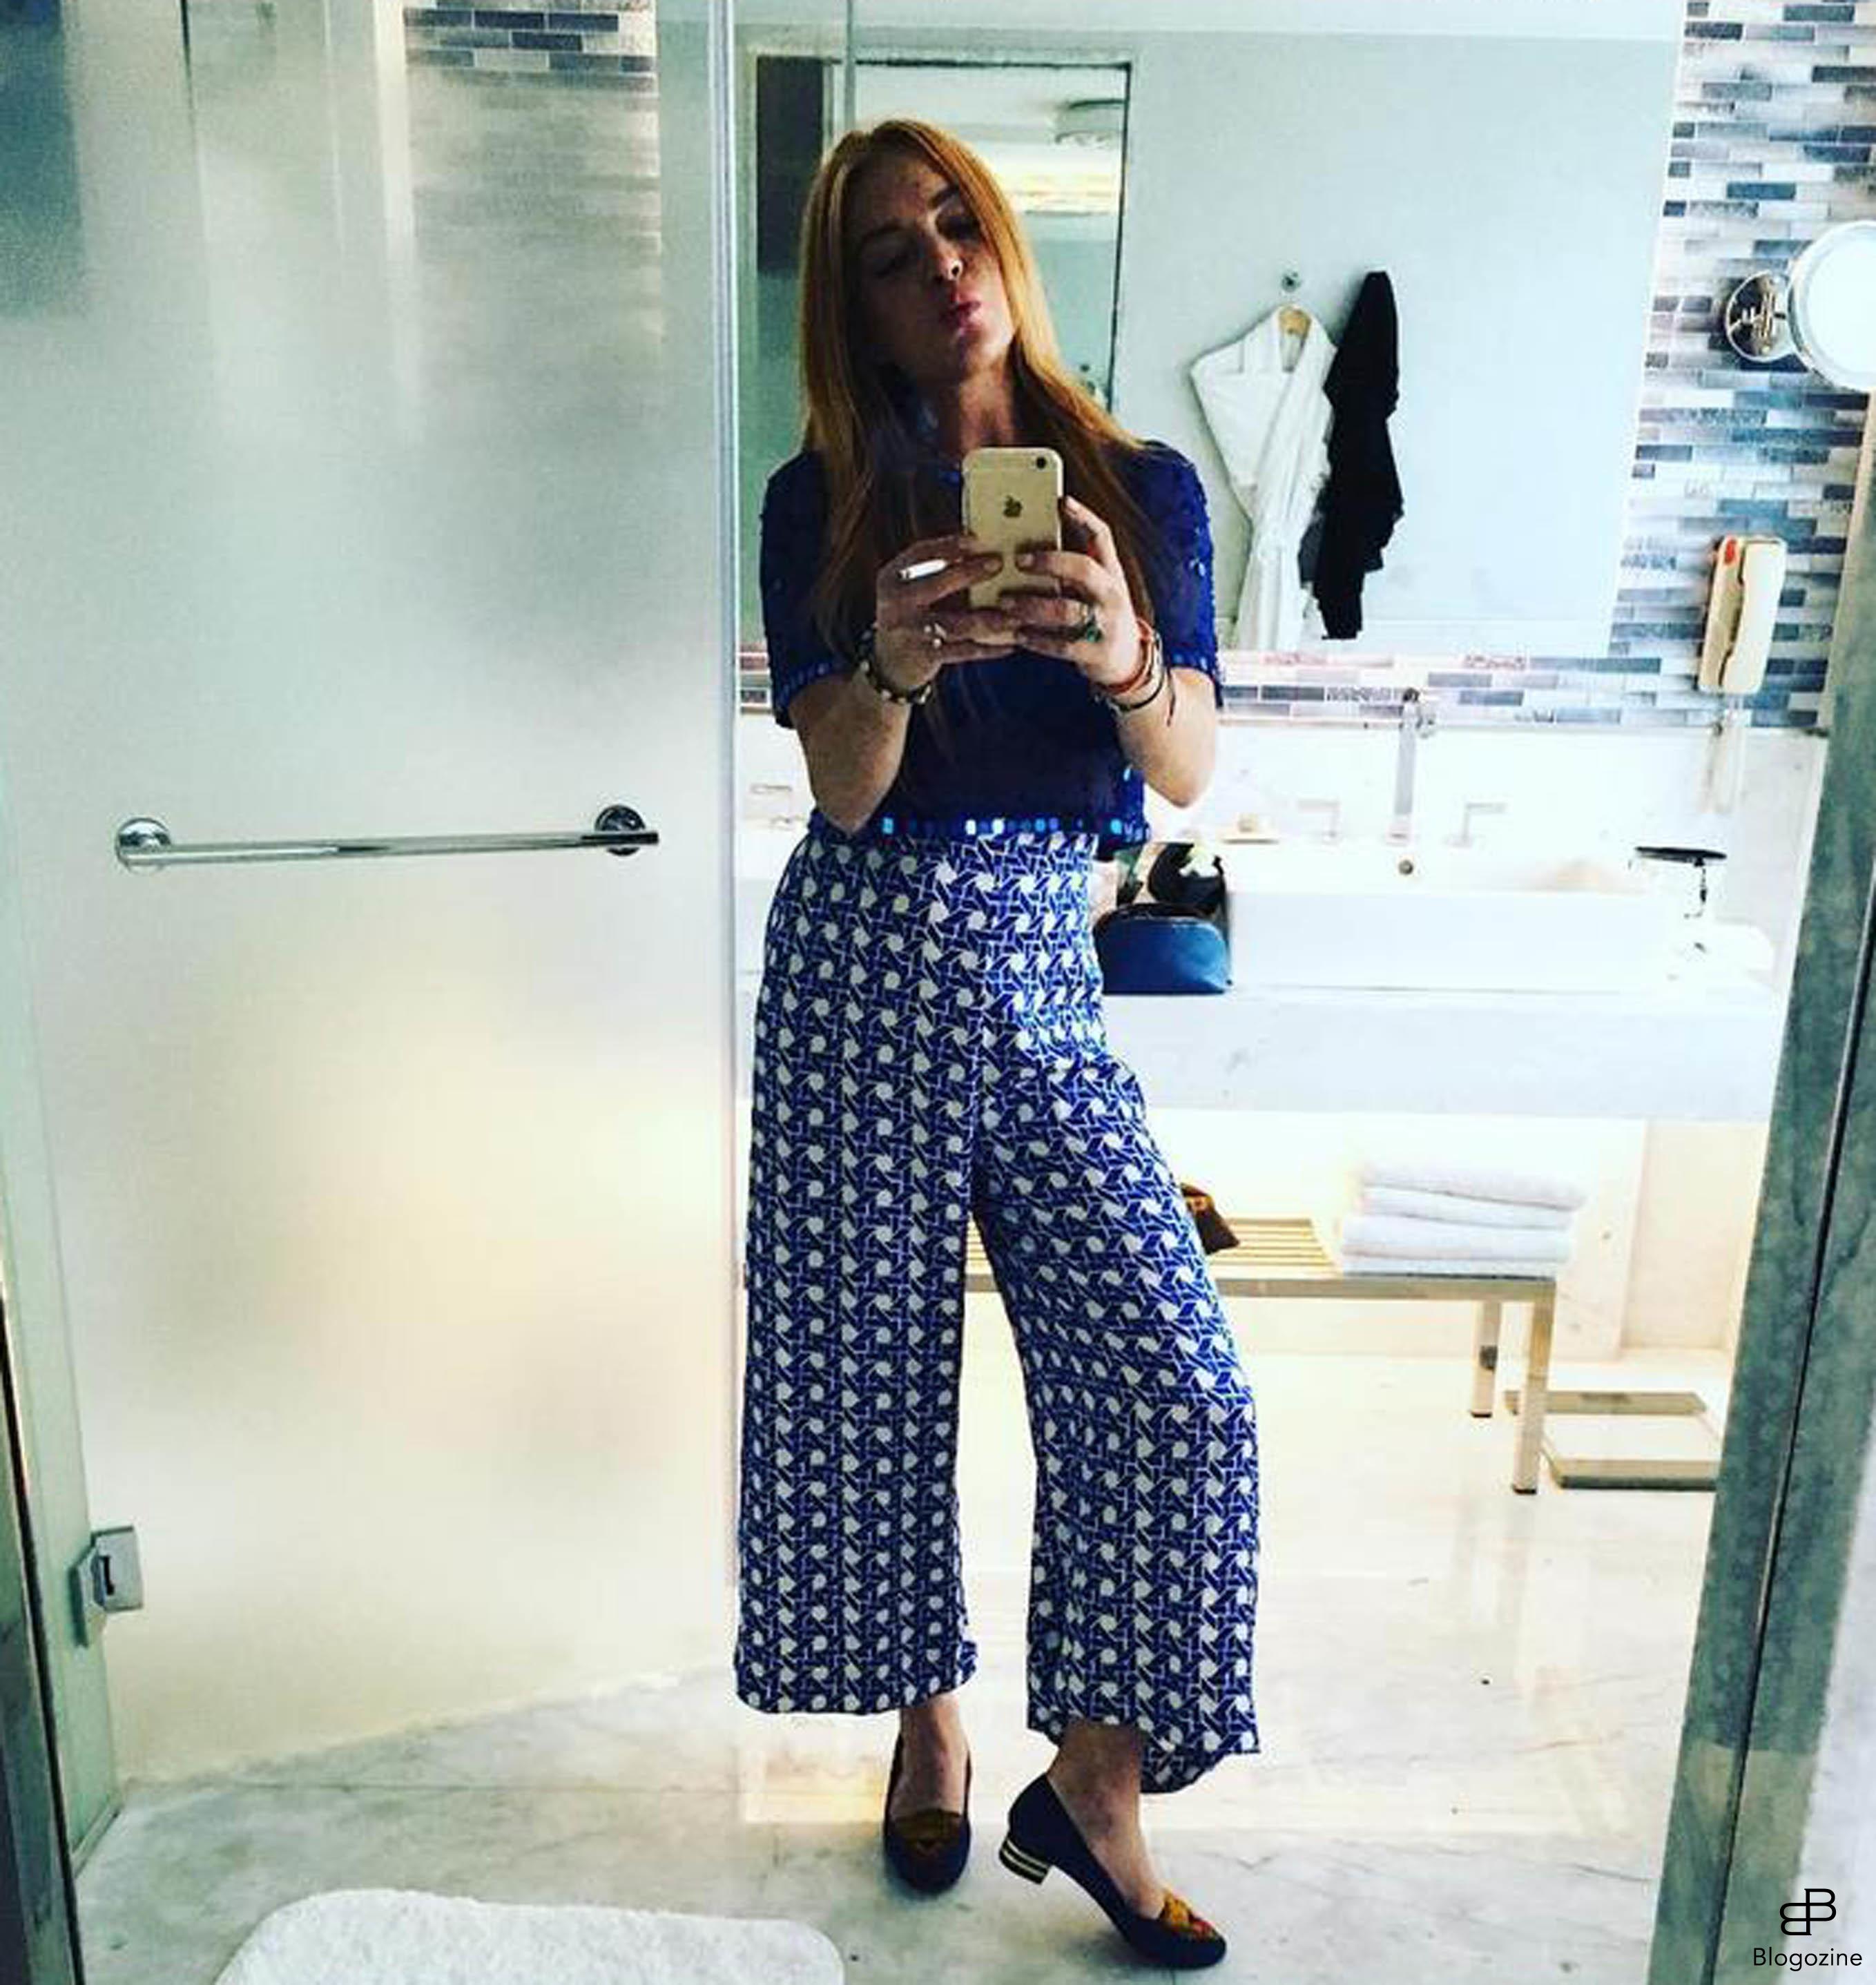 6152233 23-9-2016 Celebrity Selfies Pictured: Lindsay Lohan PLANET PHOTOS www.planetphotos.co.uk info@planetphotos.co.uk +44 (0)20 8883 1438 DISTR. STELLA PICTURES